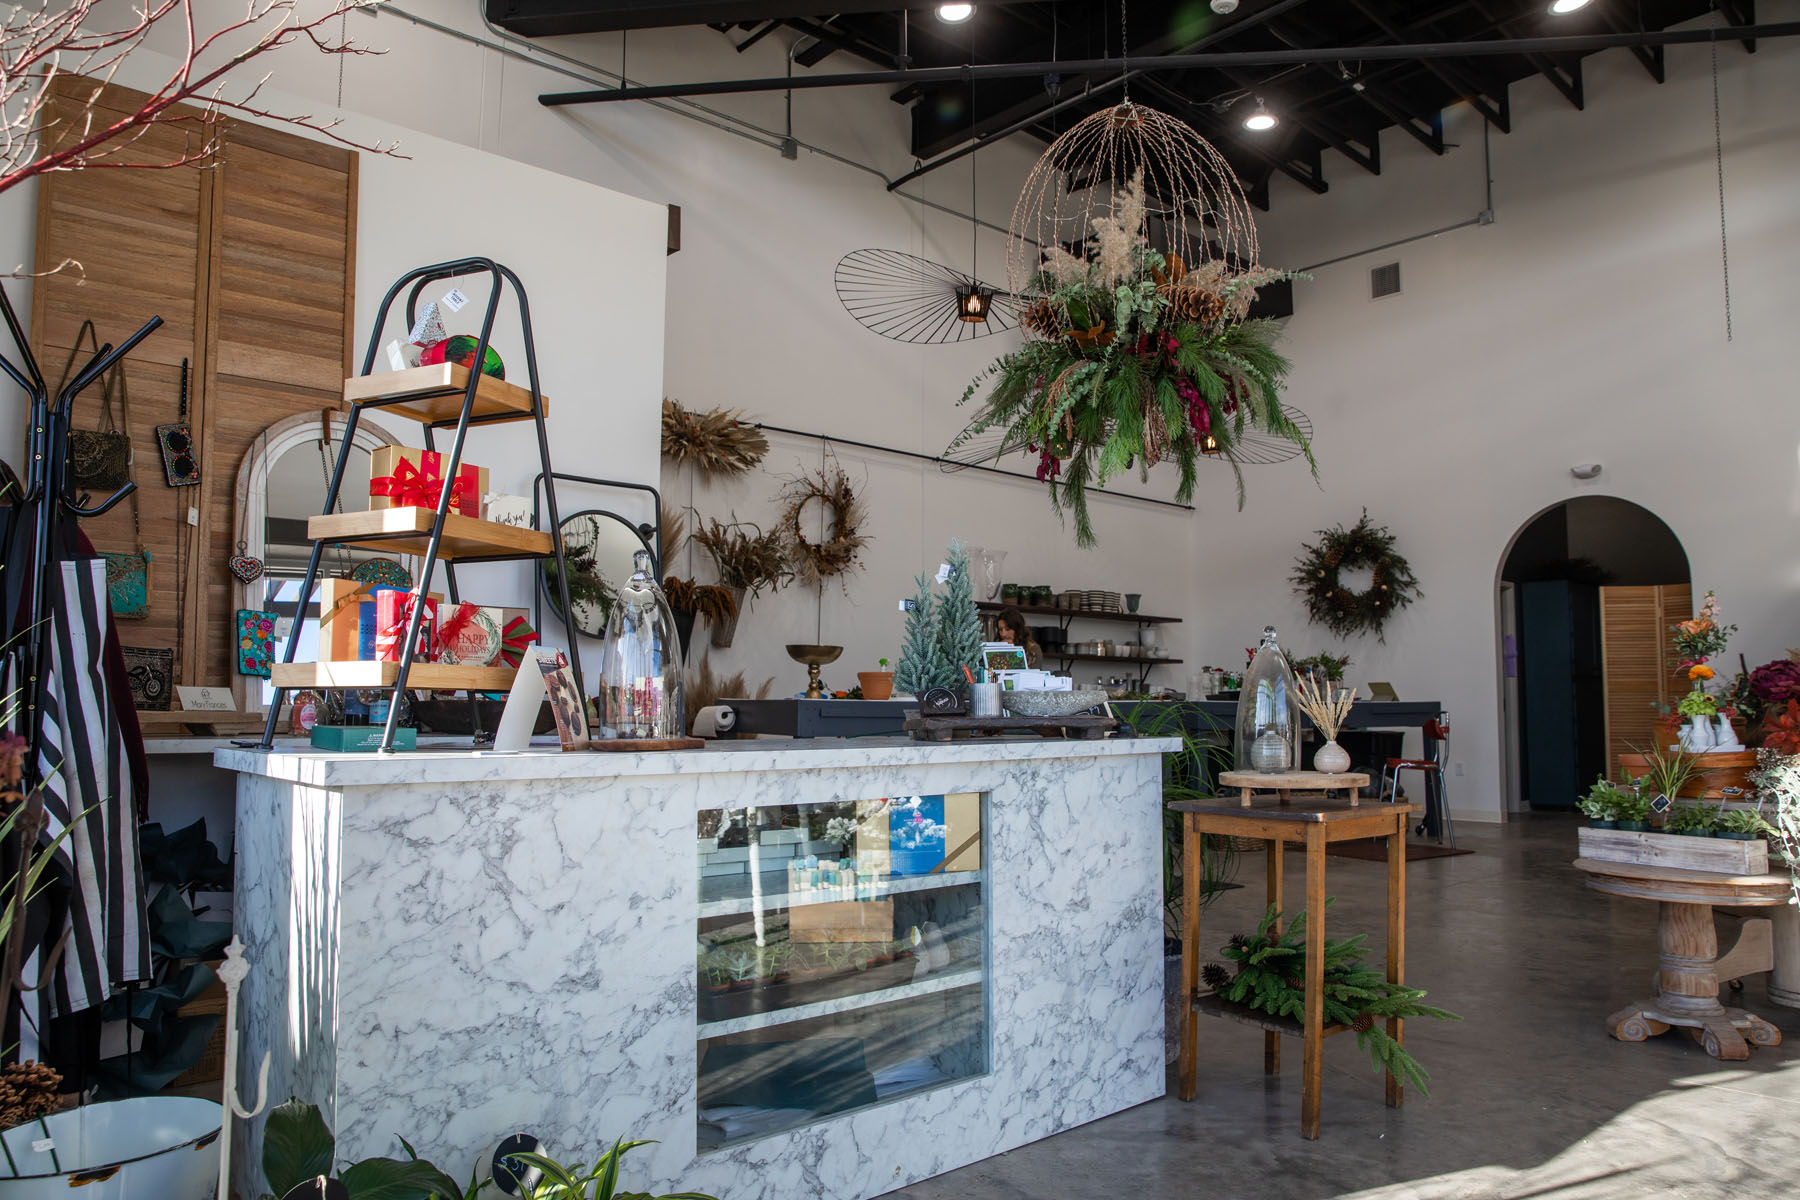 Josephine's Floral Design, The Wedge on Western